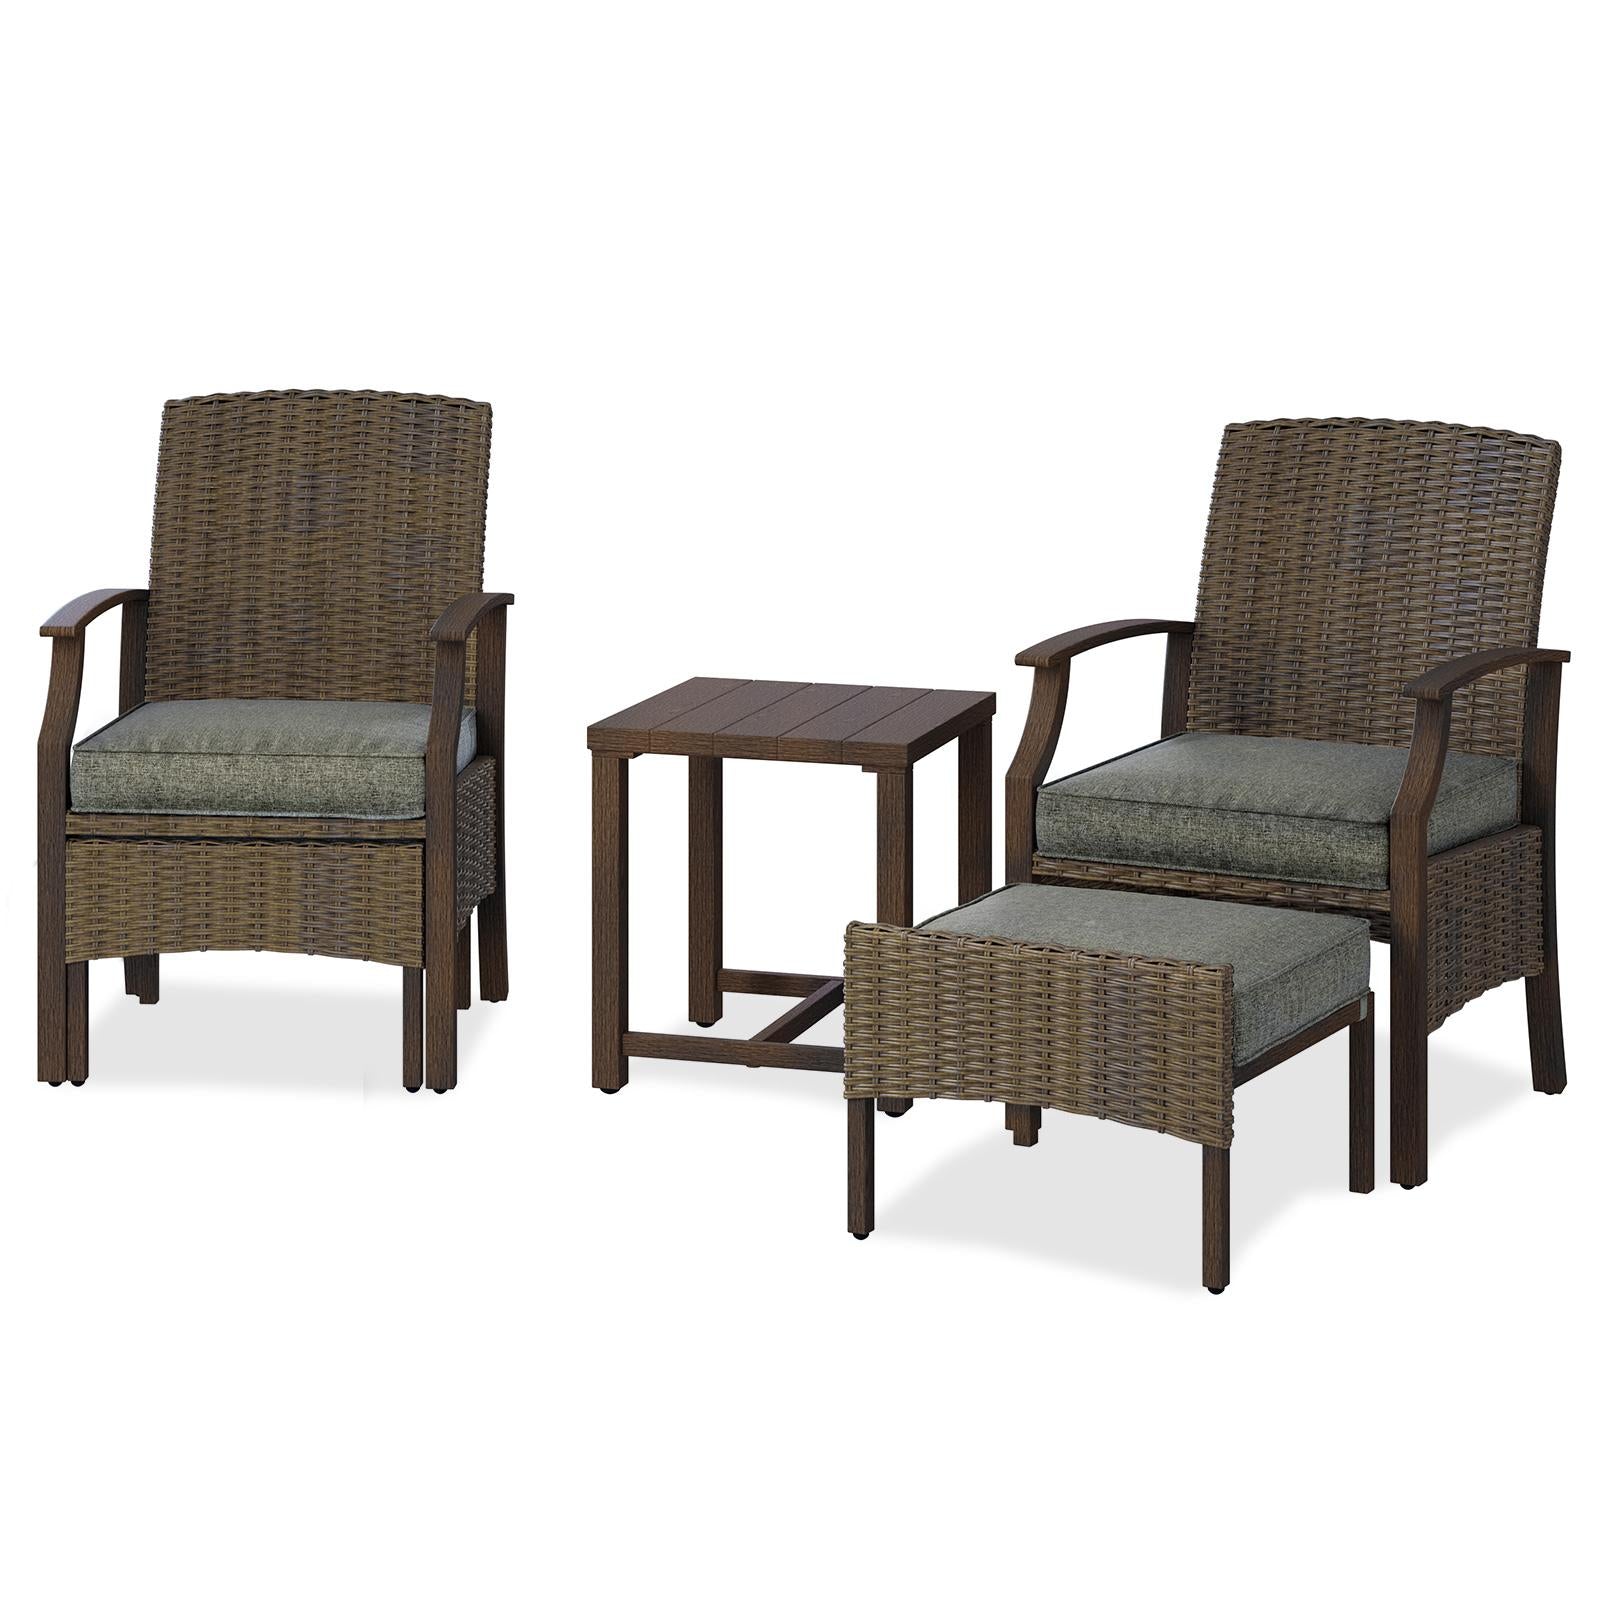 Outdoor Patio Chairs Set of 2 with Ottoman and Coffee Table 5 Piece Outdoor Patio Furniture Set